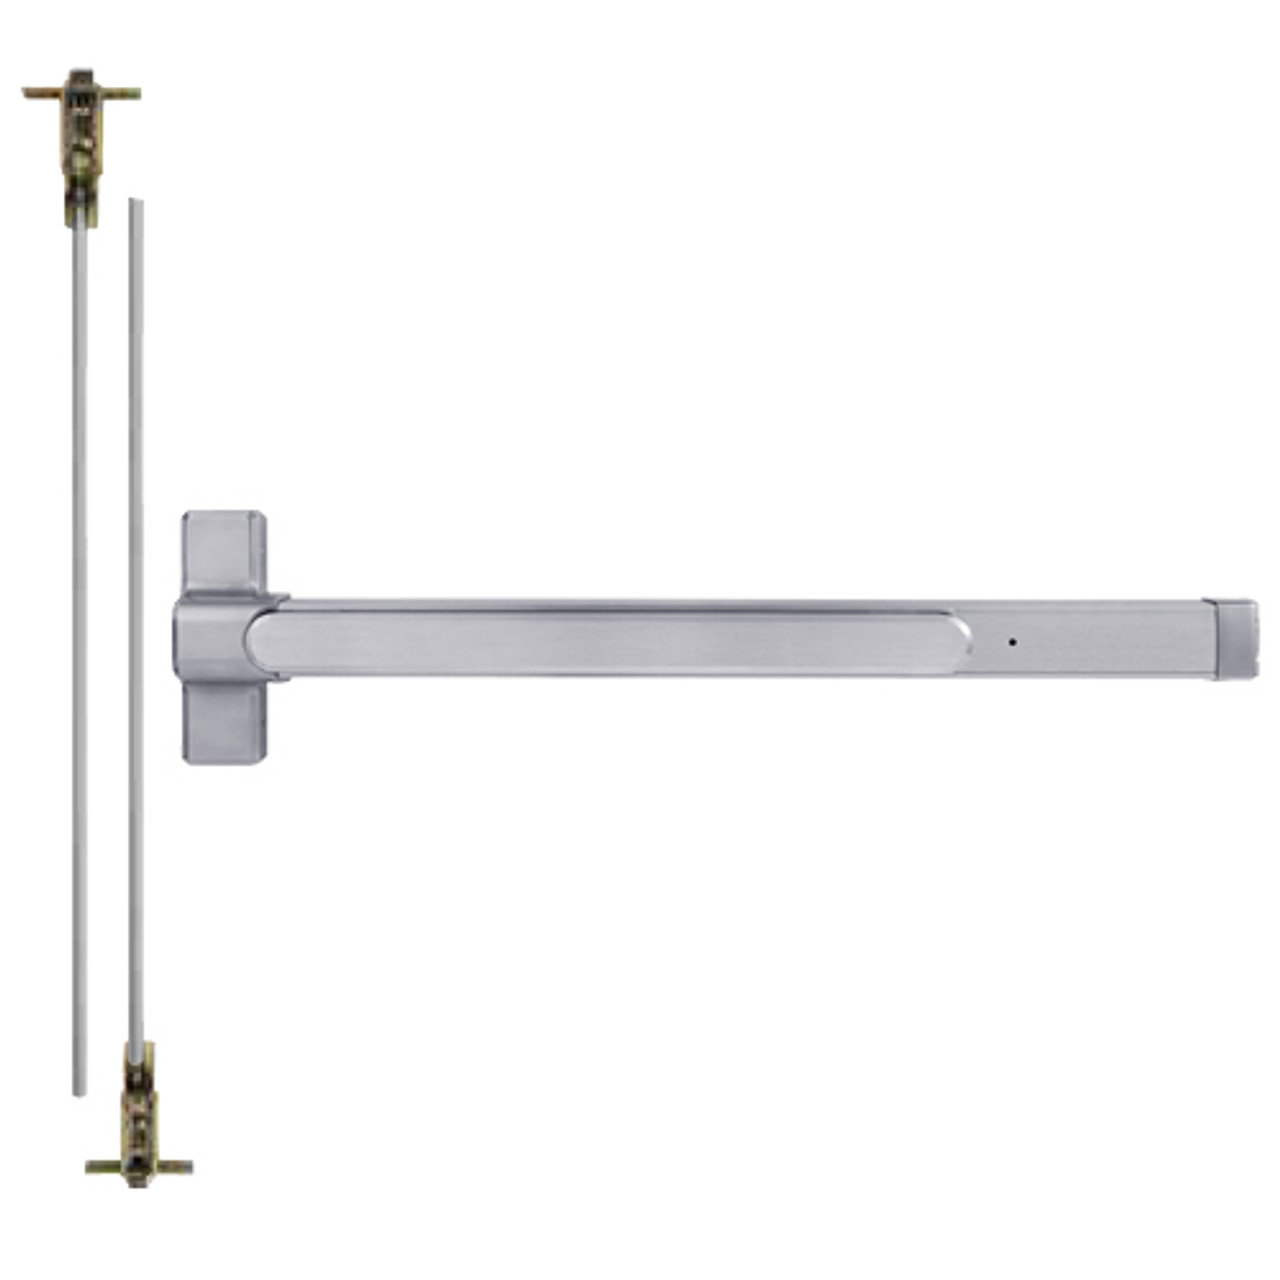 QED126LRX-48-8-626 Stanley QED100 Series Heavy Duty Concealed Vertical Rod Fire Rated Exit Device in Satin Chrome Finish